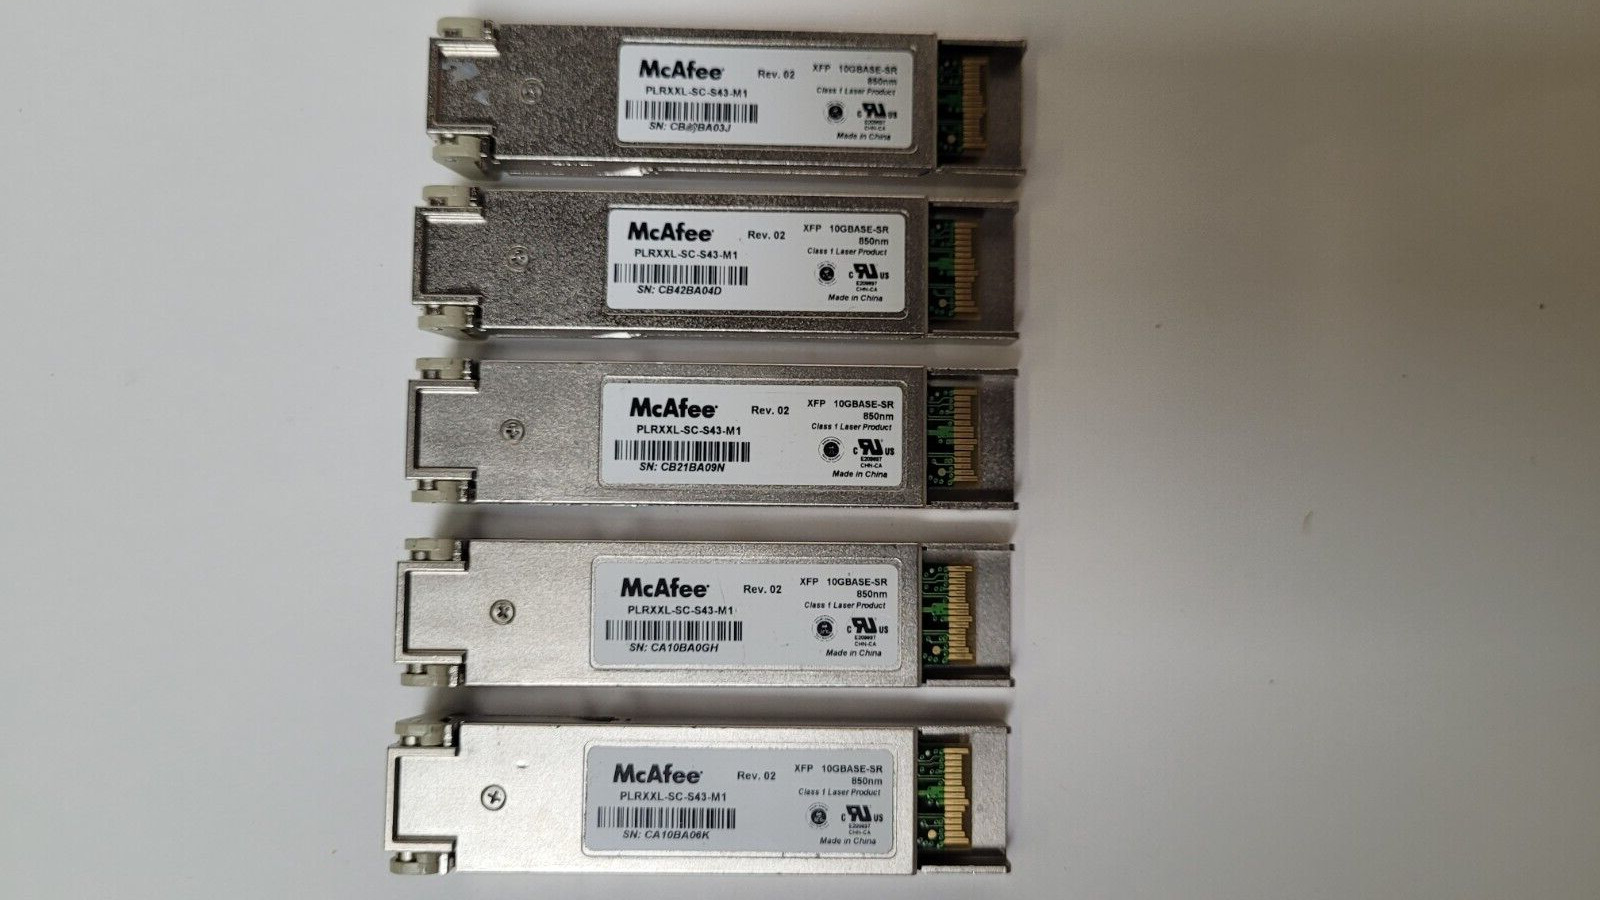 McAfee PLRXXL-SC-S43-M1 XFP 10GBase-SR 850nm Transceivers - Lot of 5